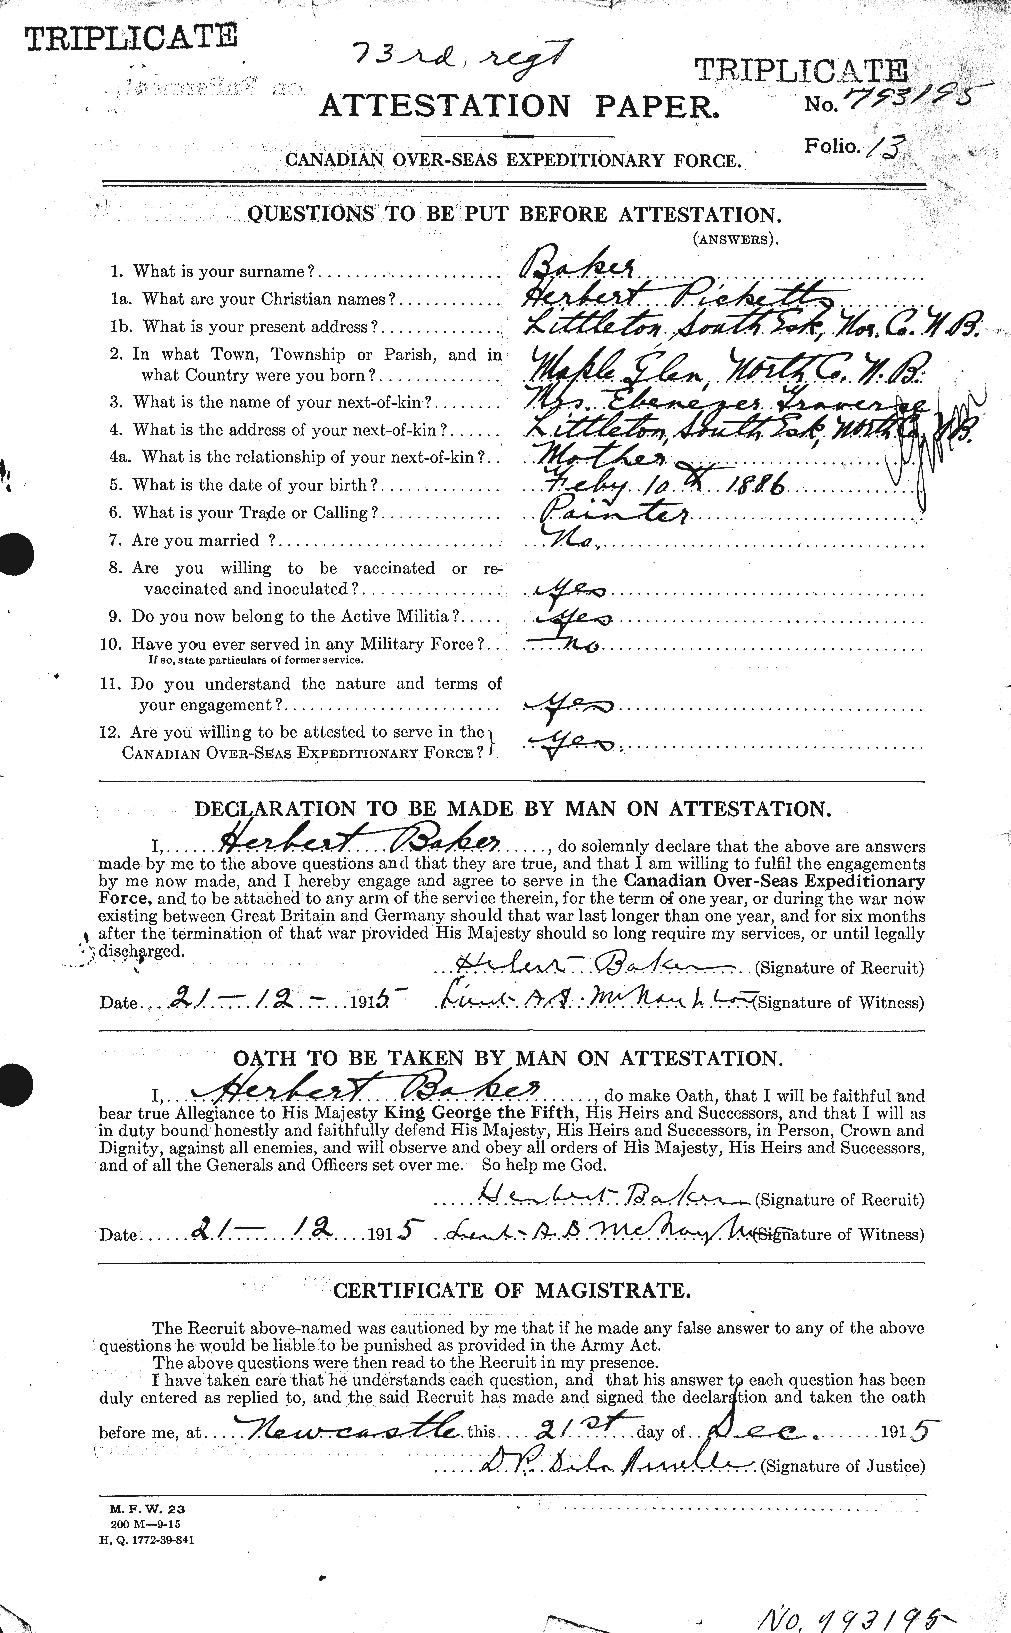 Personnel Records of the First World War - CEF 216110a